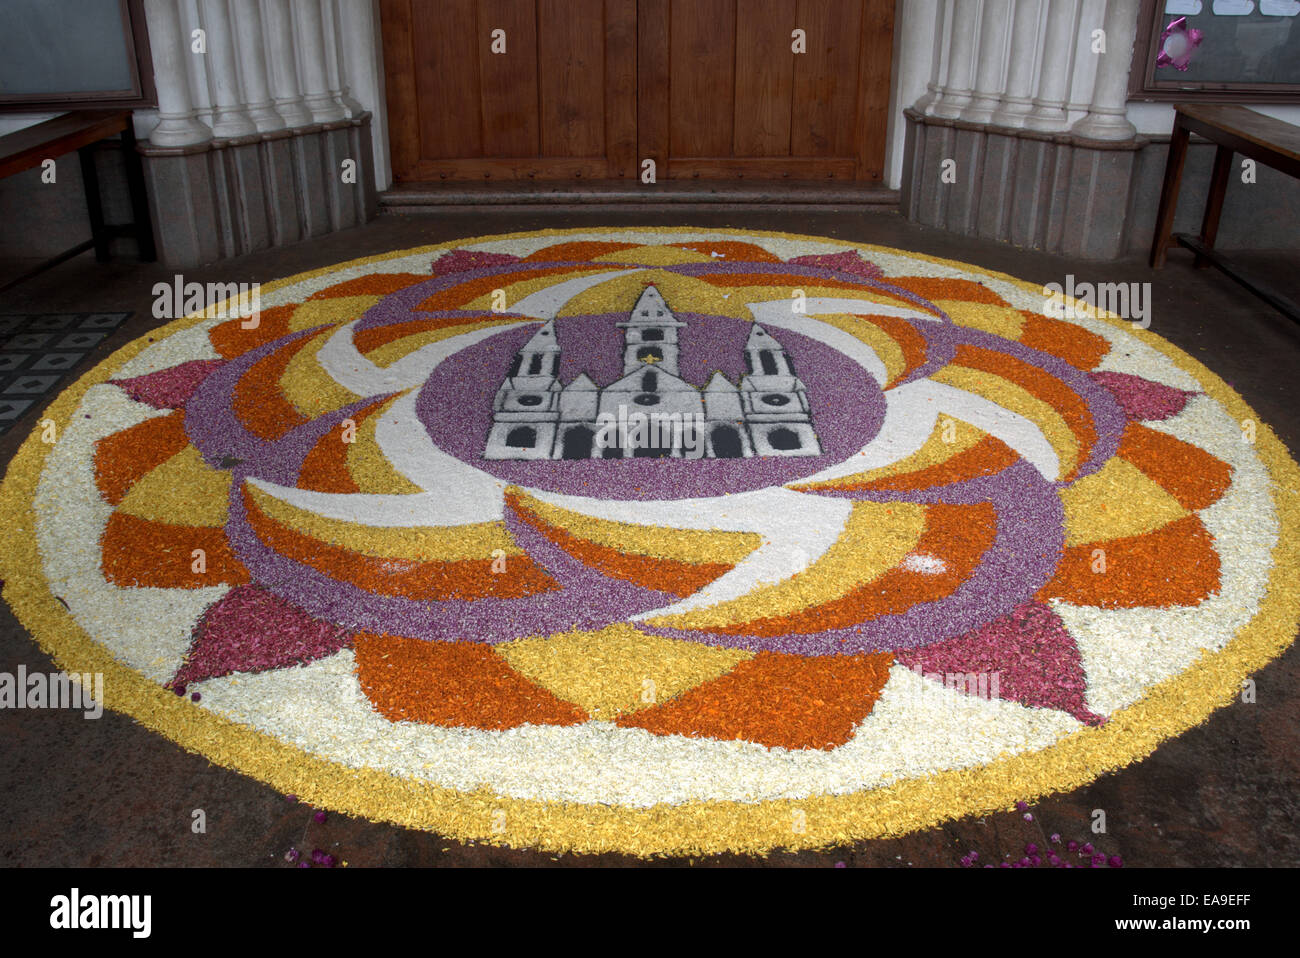 Pookalam floral flower carpet during the Onam festival in Kerala. Stock Photo